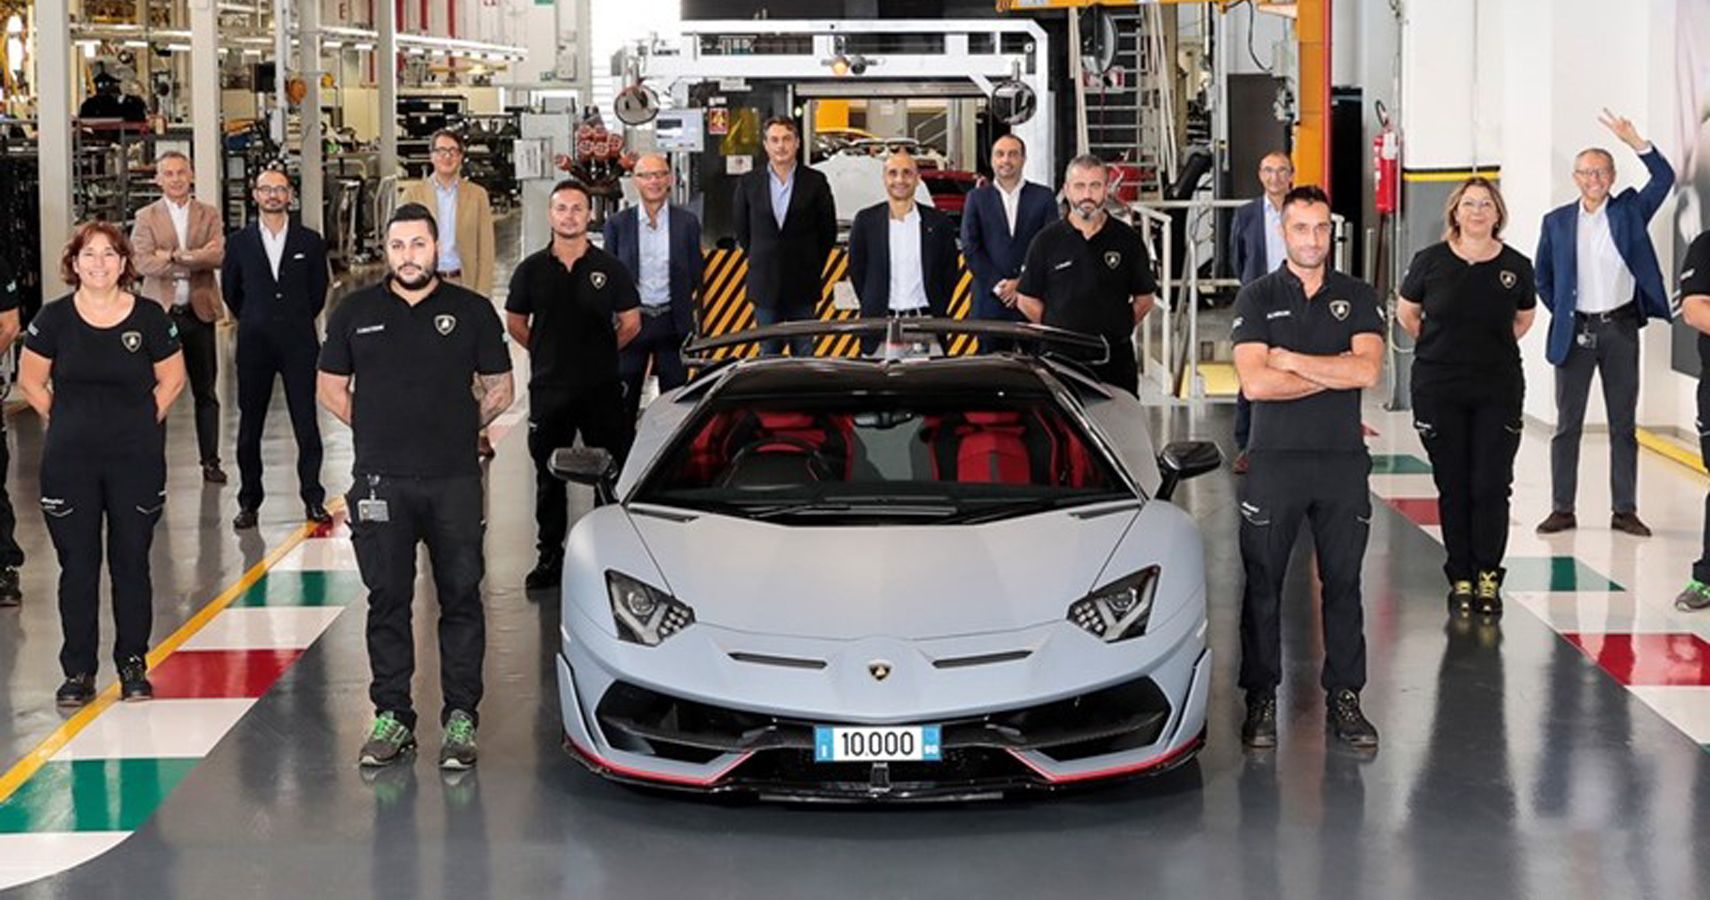 Lamborghini workers assemble beside 10000th rollout of Avent